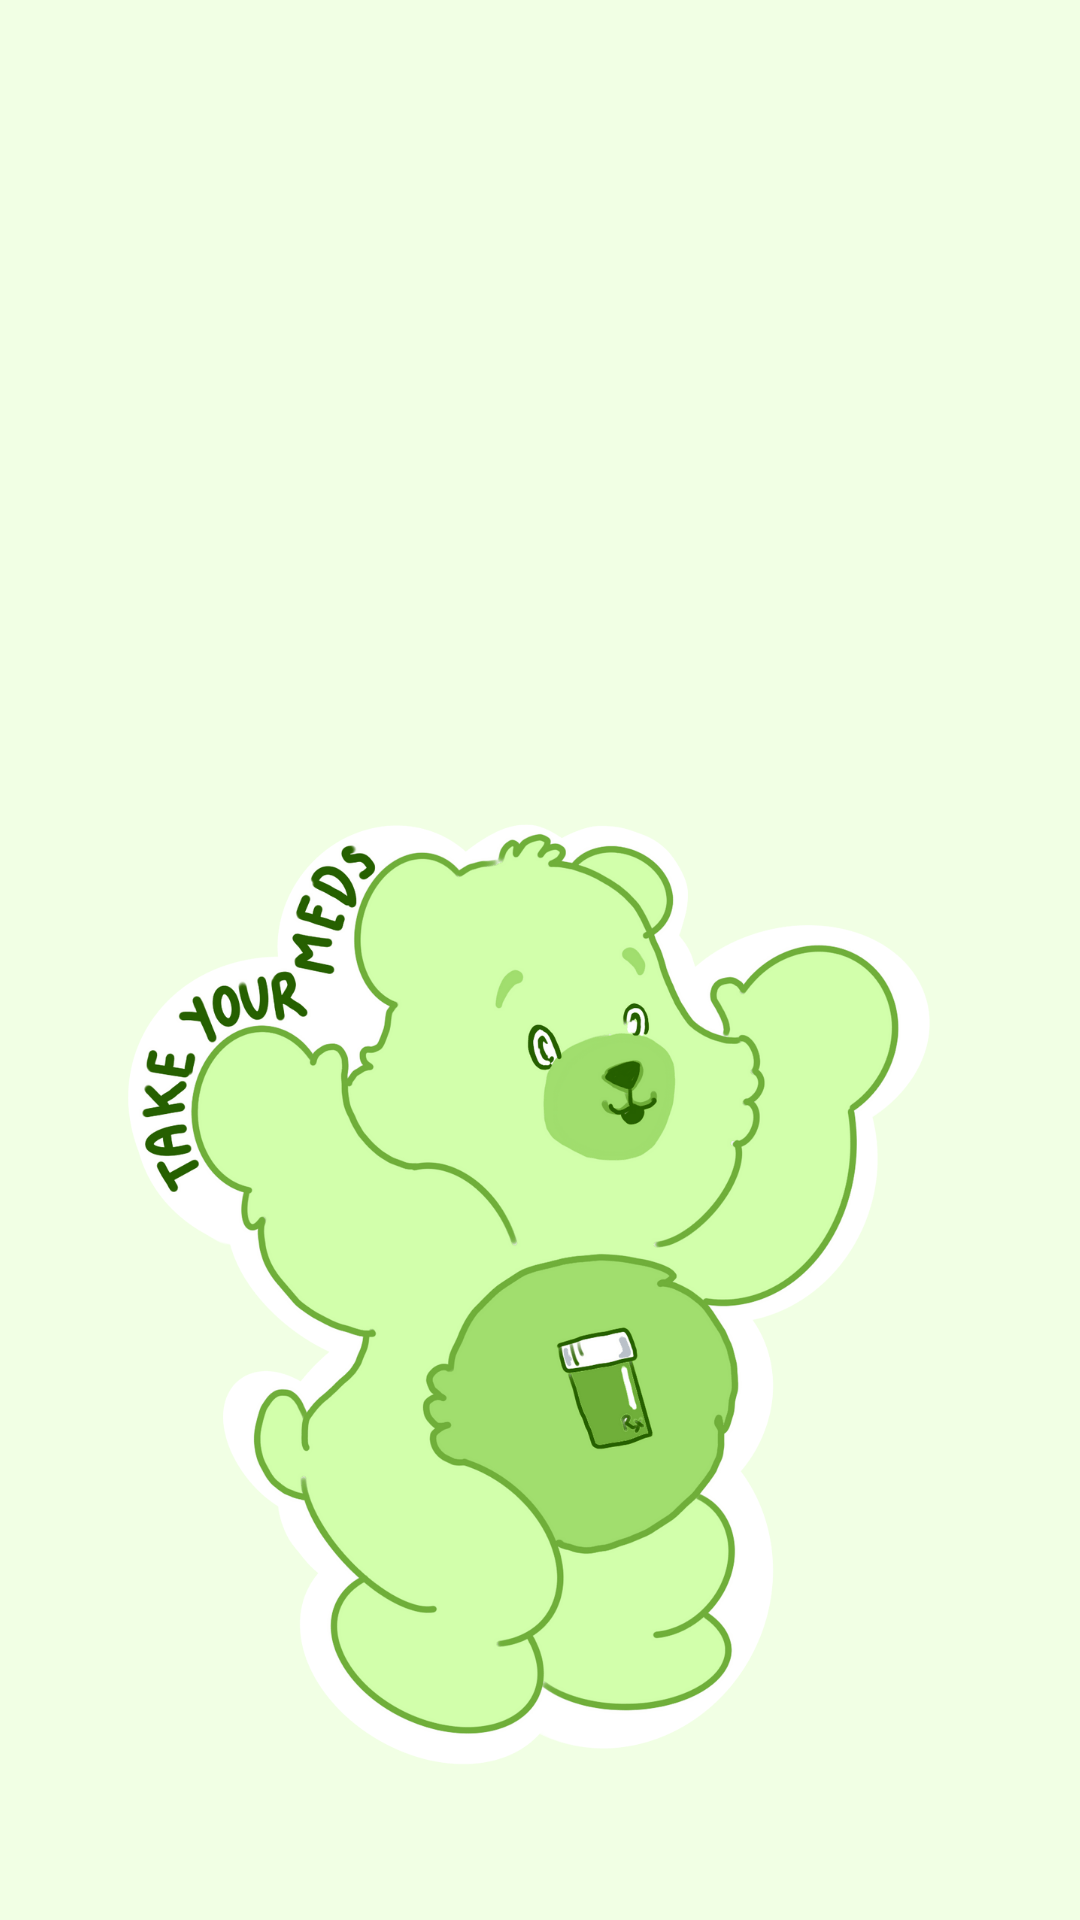 June Wallpaper : Self Care Bears! by artinjest from Patreon